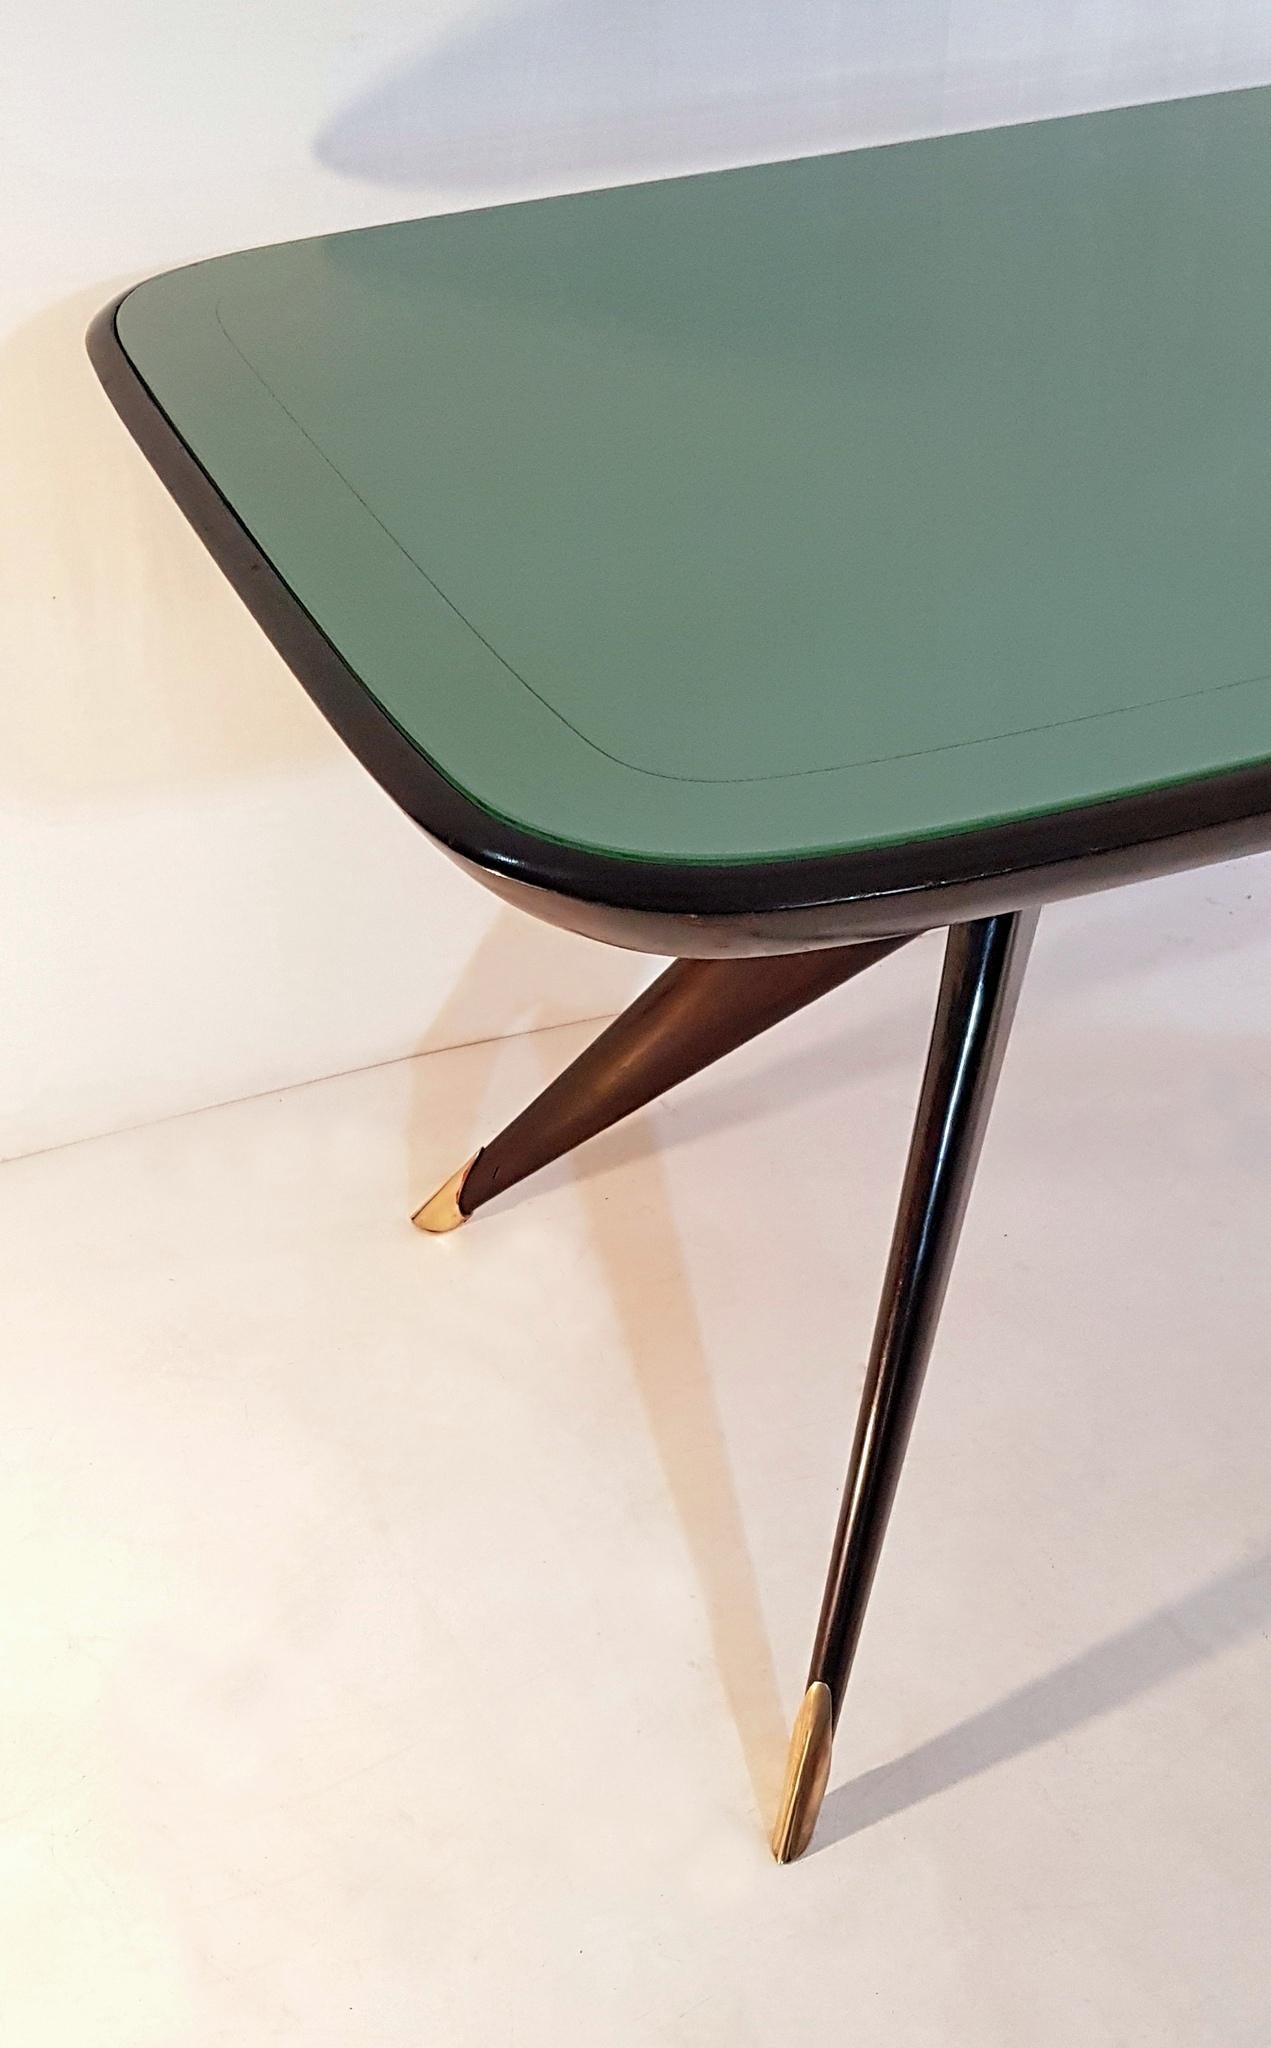 Fabulous dining table produced in Italy in the 1950s. The base is made from stained beech and the legs has brass caps and finally the top is made from glass which has a green/turqoise vivid color. Easily sits eight people. In excellent condition.